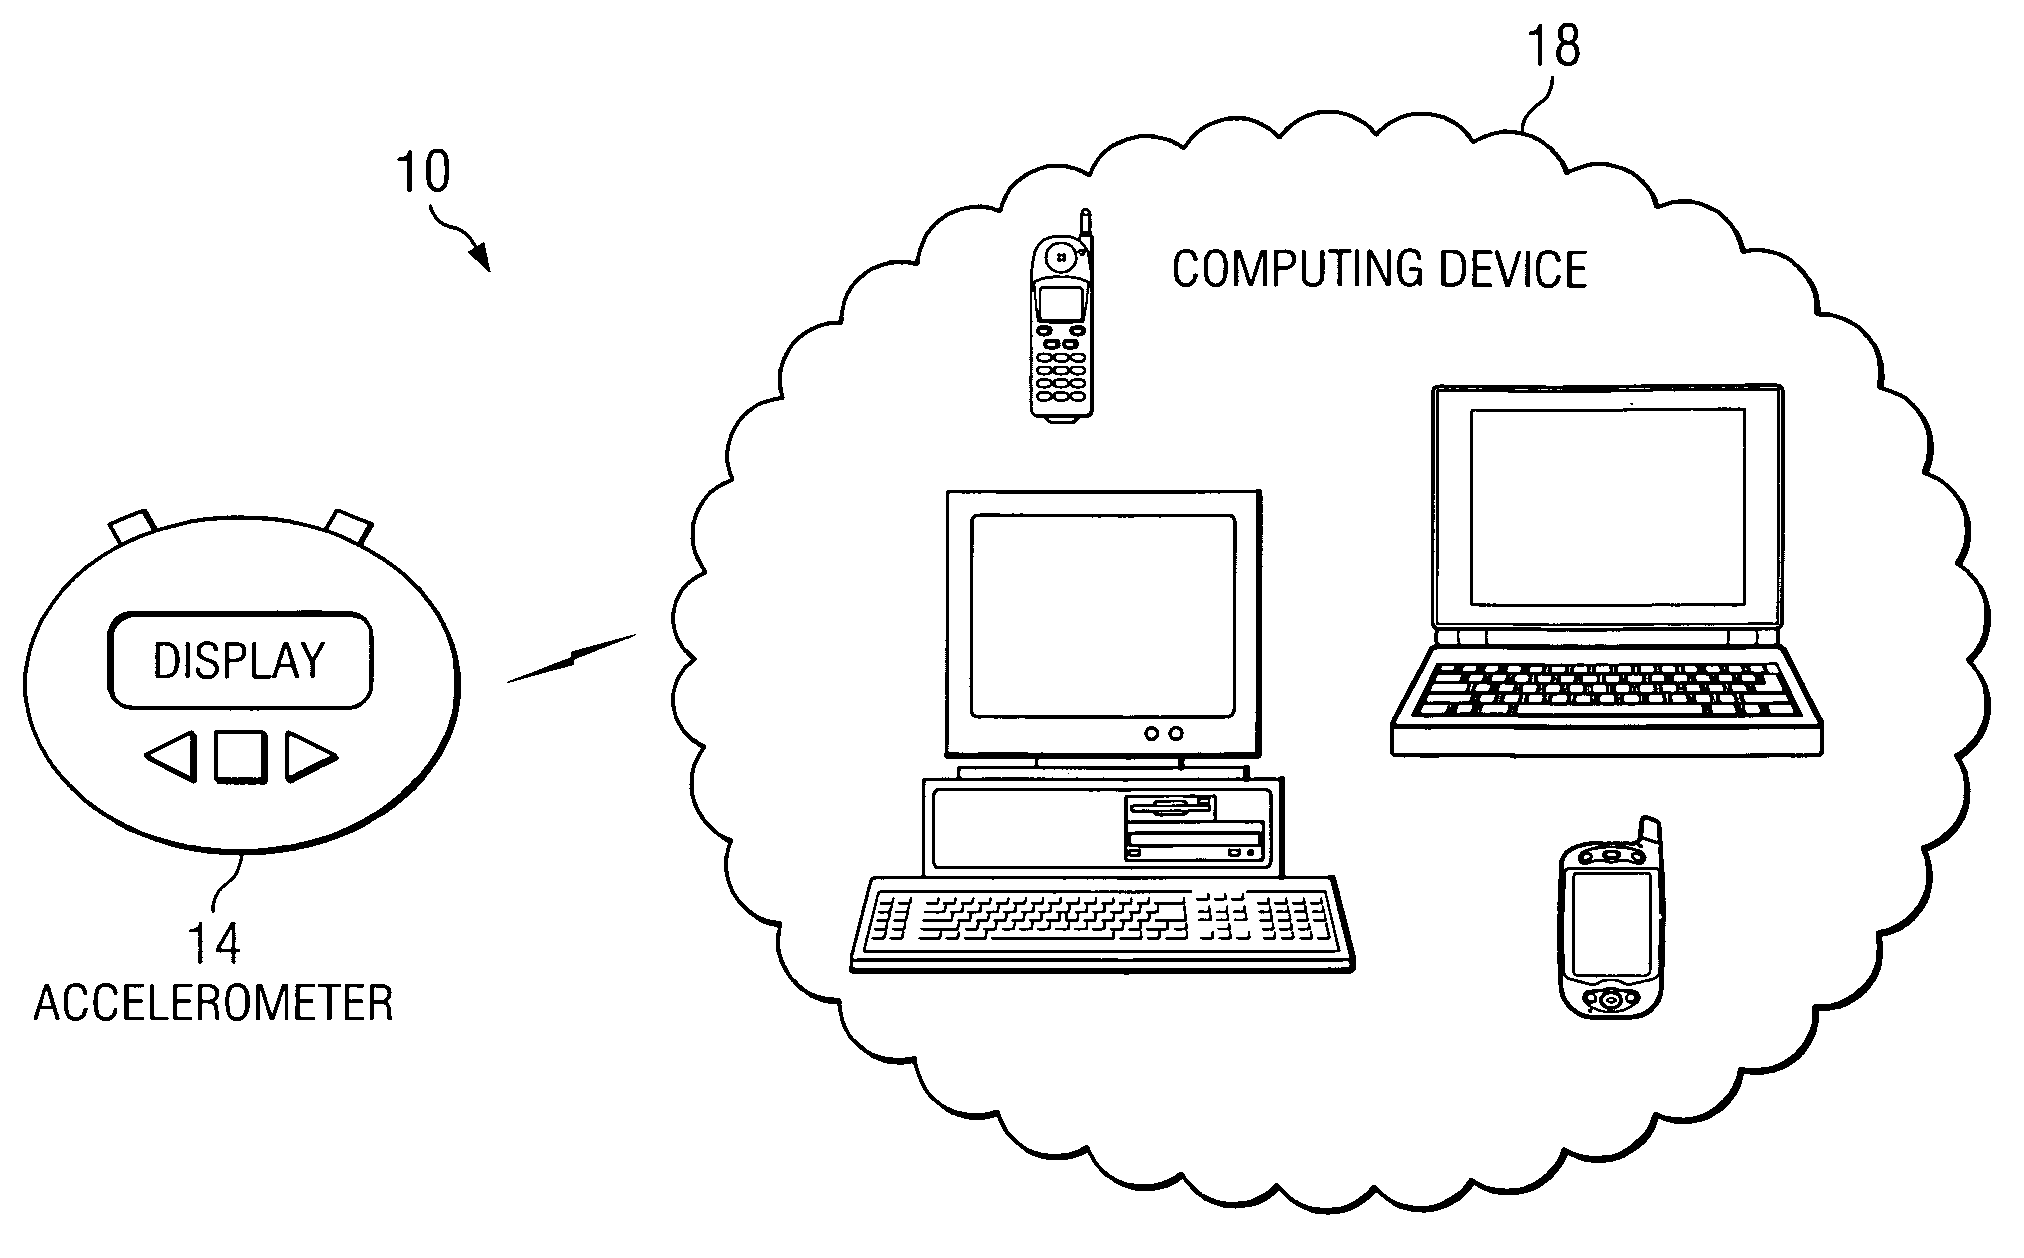 Accelerometer for data collection and communication